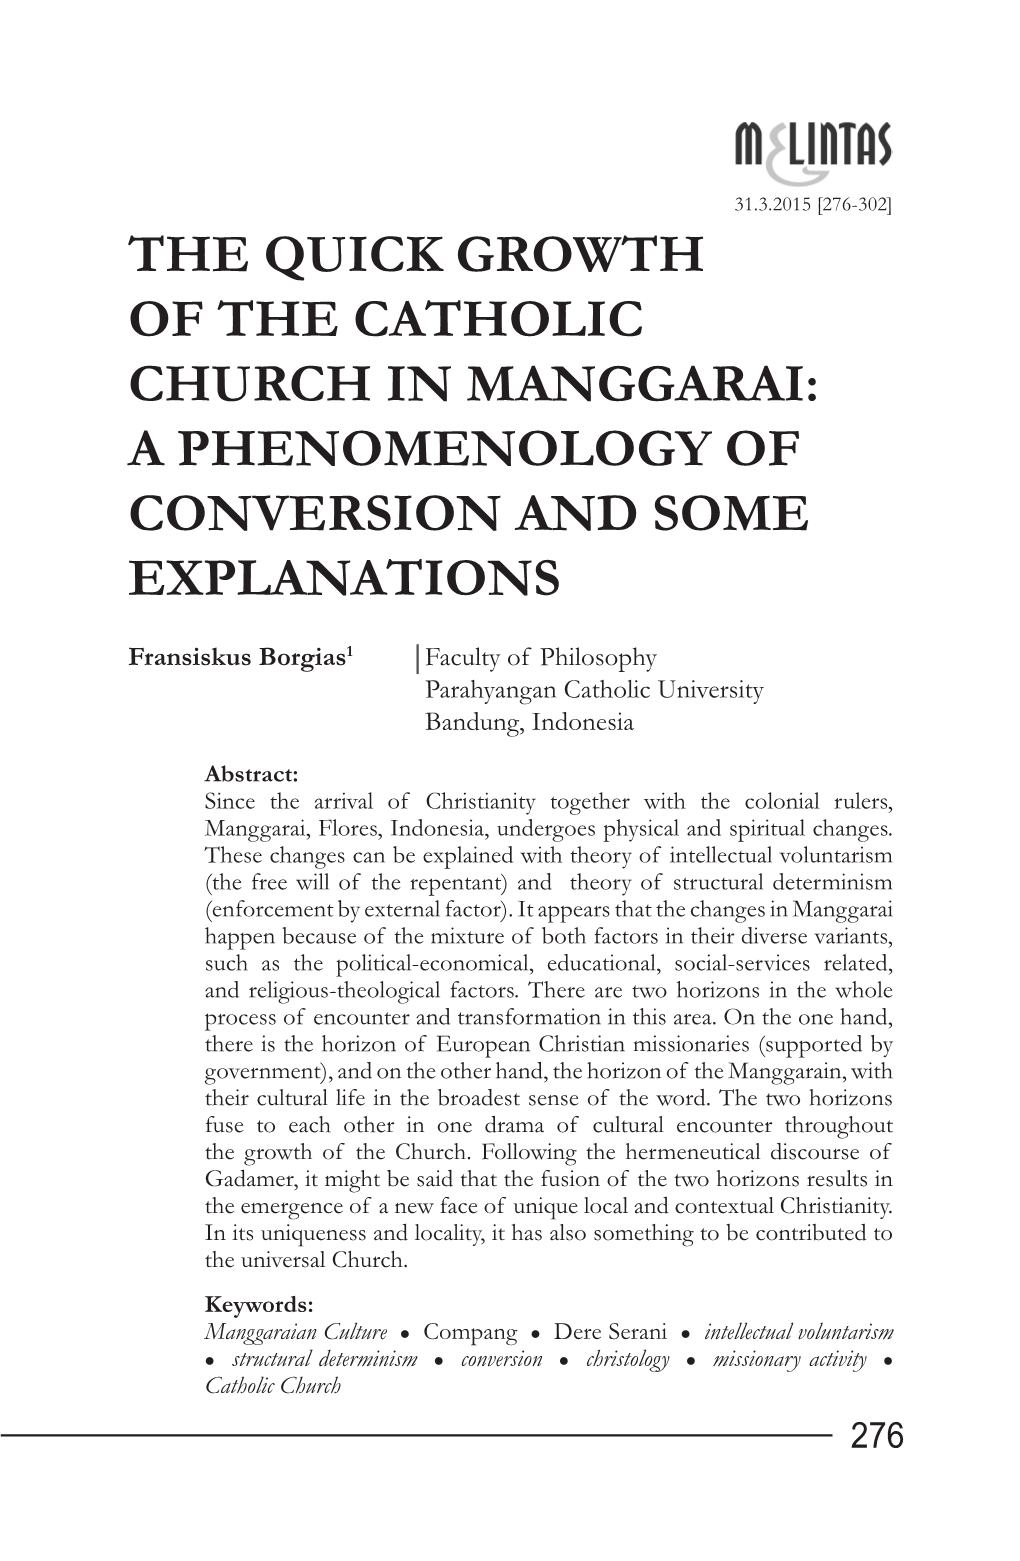 A Phenomenology of Conversion and Some Explanations